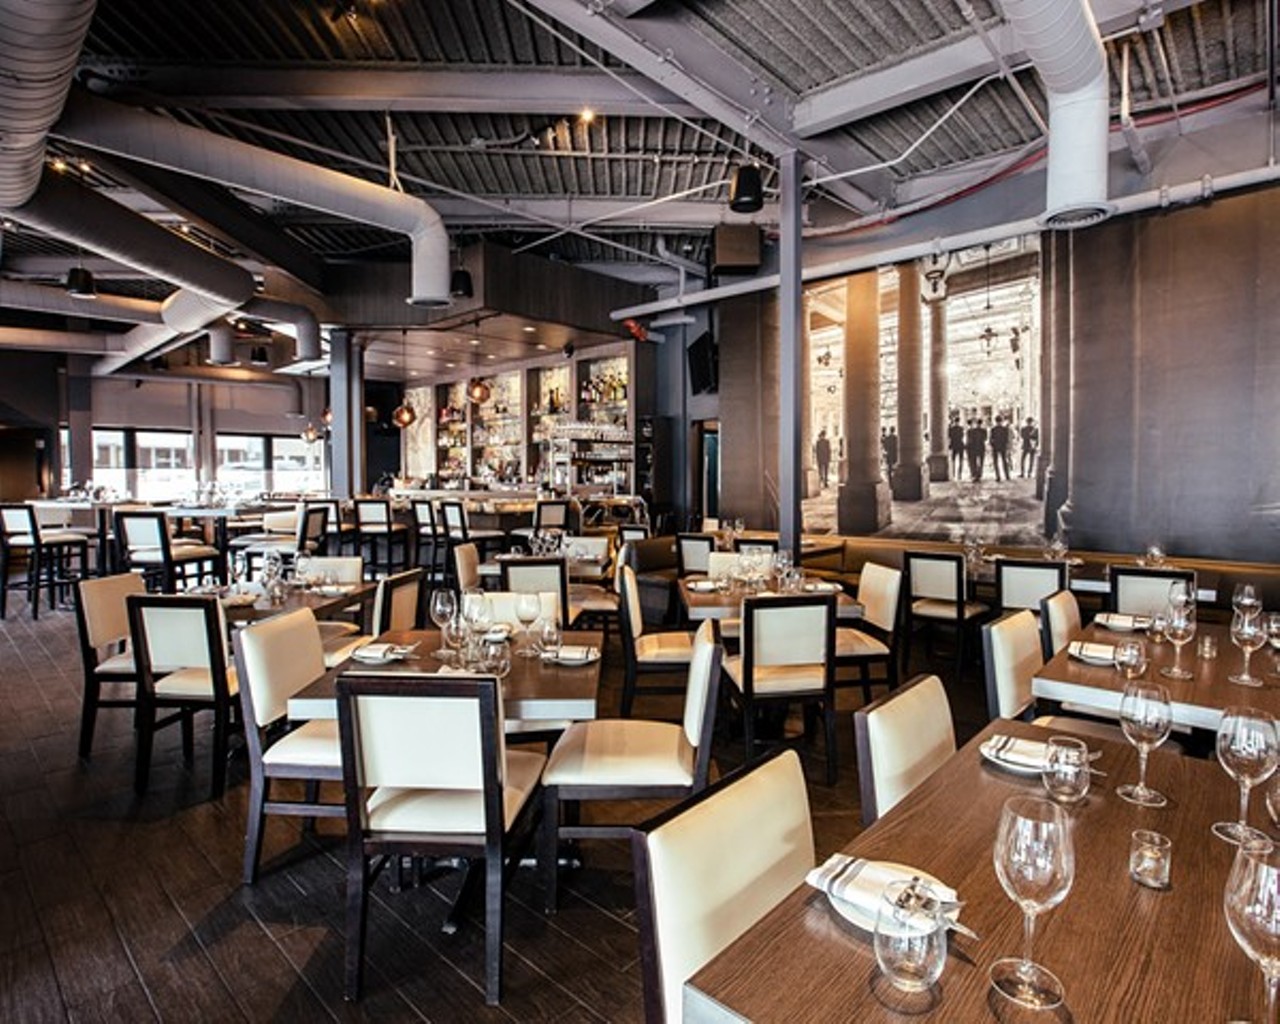 Bistro 82
401 S. Lafayette Ave., Royal Oak
One of the first restaurant deaths of 2020 was Hour Detroit&#146;s 2017&#146;s Restaurant of the Year, Bistro 82. The French-inspired fine-dining restaurant closed its doors just shy of its sixth anniversary in January. Owner Aaron F. Belen also has a hand in The Morrie, a roadhouse-style restaurant concept; there are Morrie locations operating in Royal Oak and Birmingham, with plans for further expansion.
Photo courtesy of Bistro 82